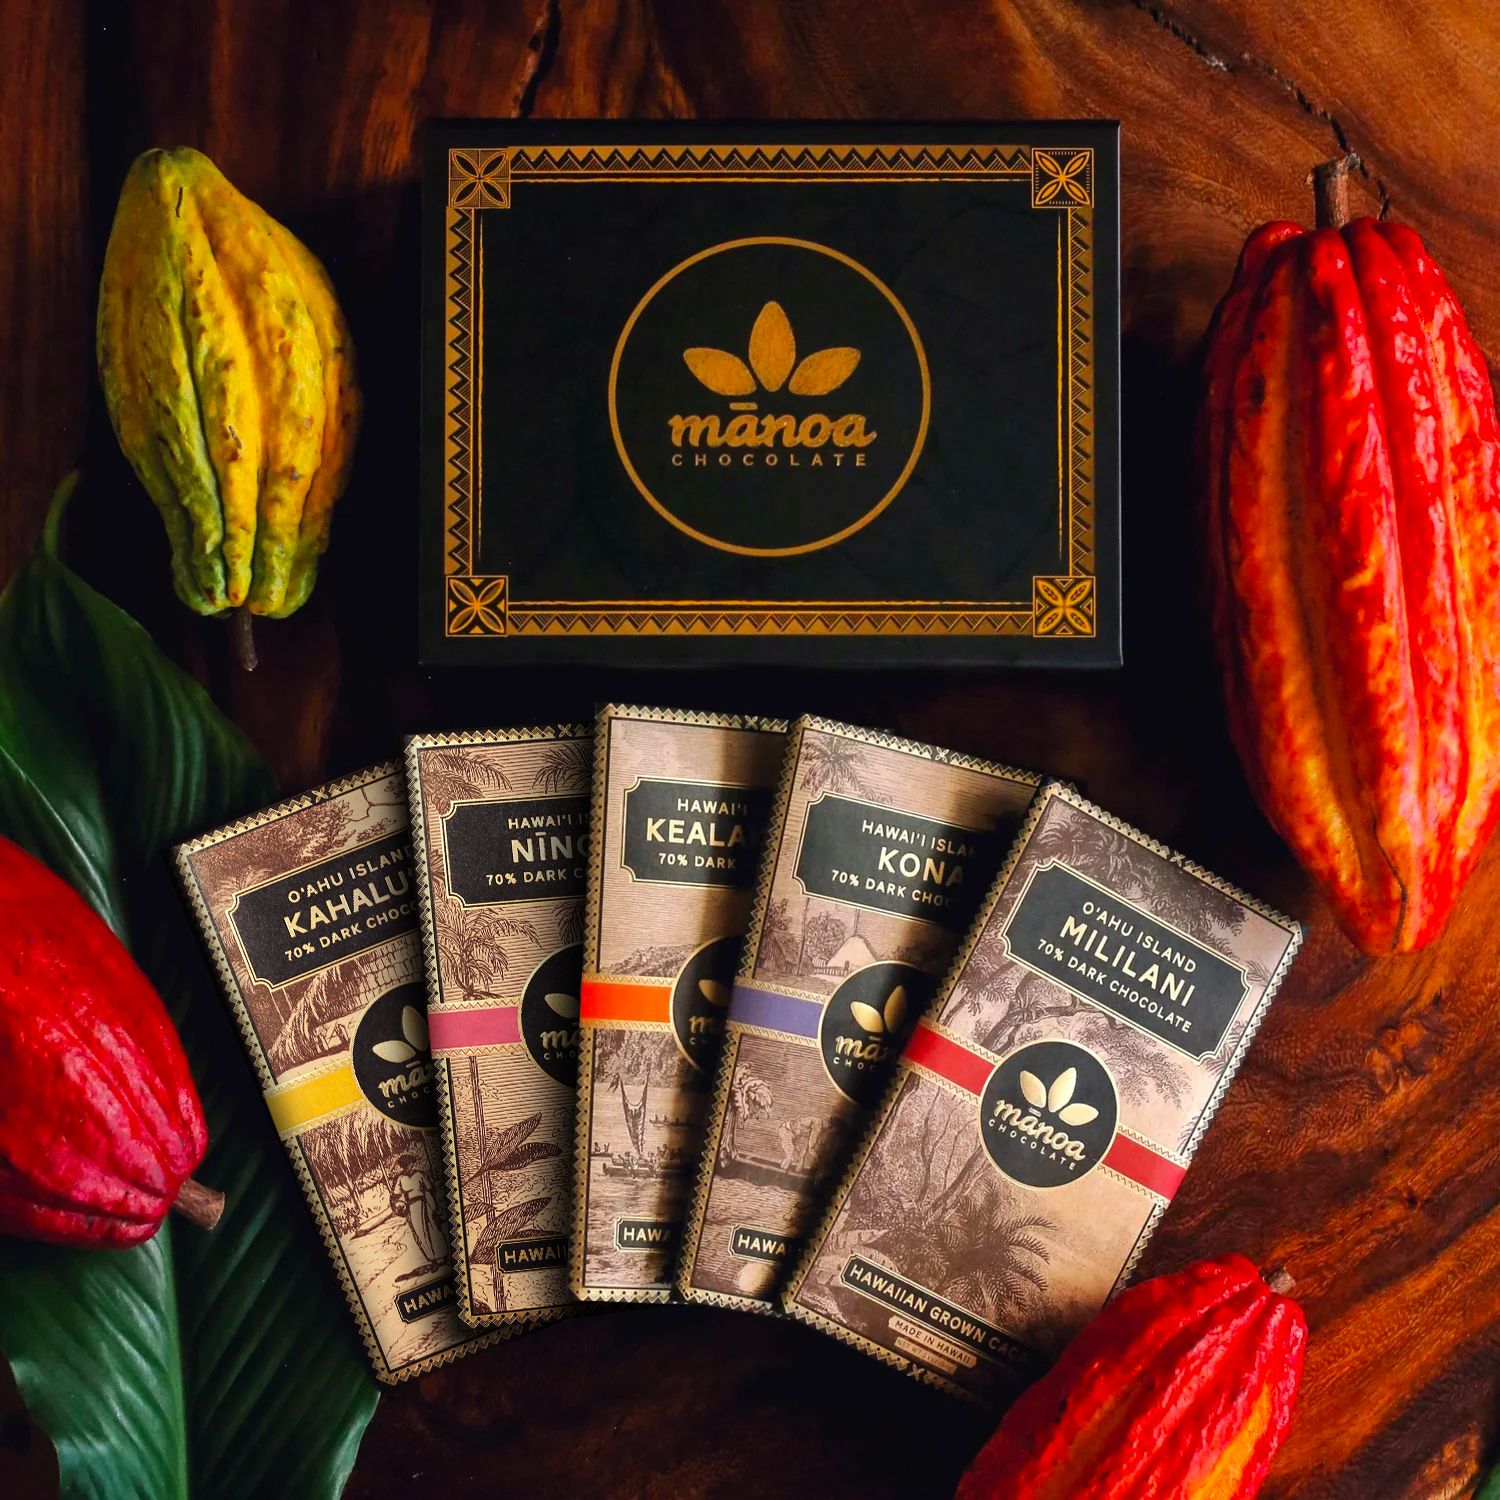 Image of 5 Hawaii grown chocolate bars packaged with gift box